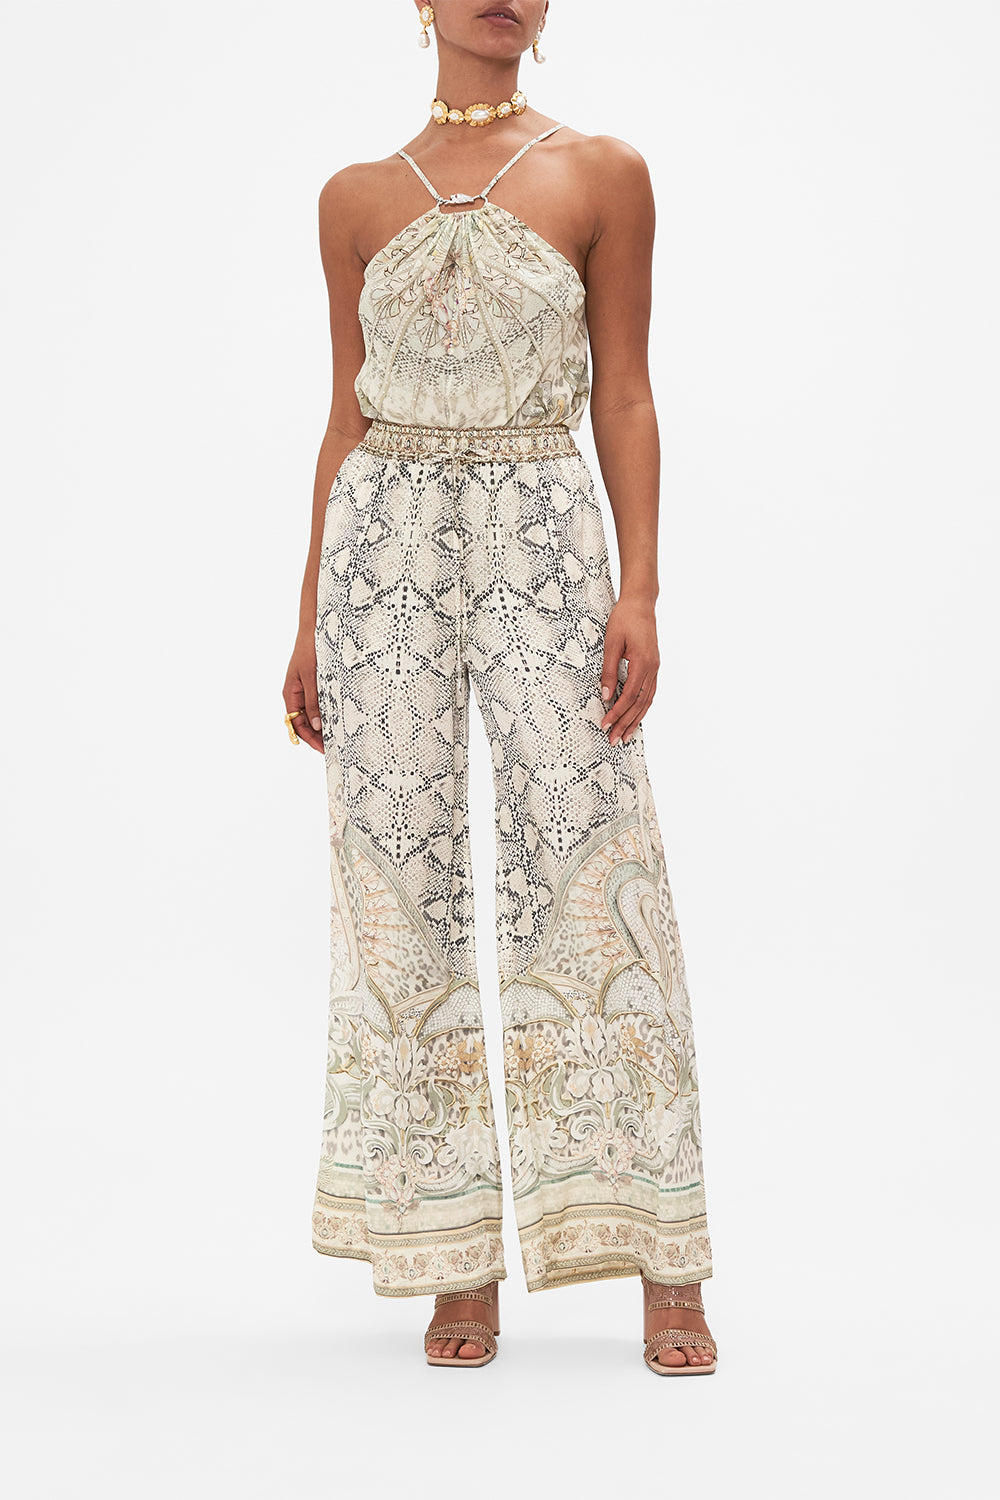 Camilla - Lounge Pant in Ivory Tower Tales